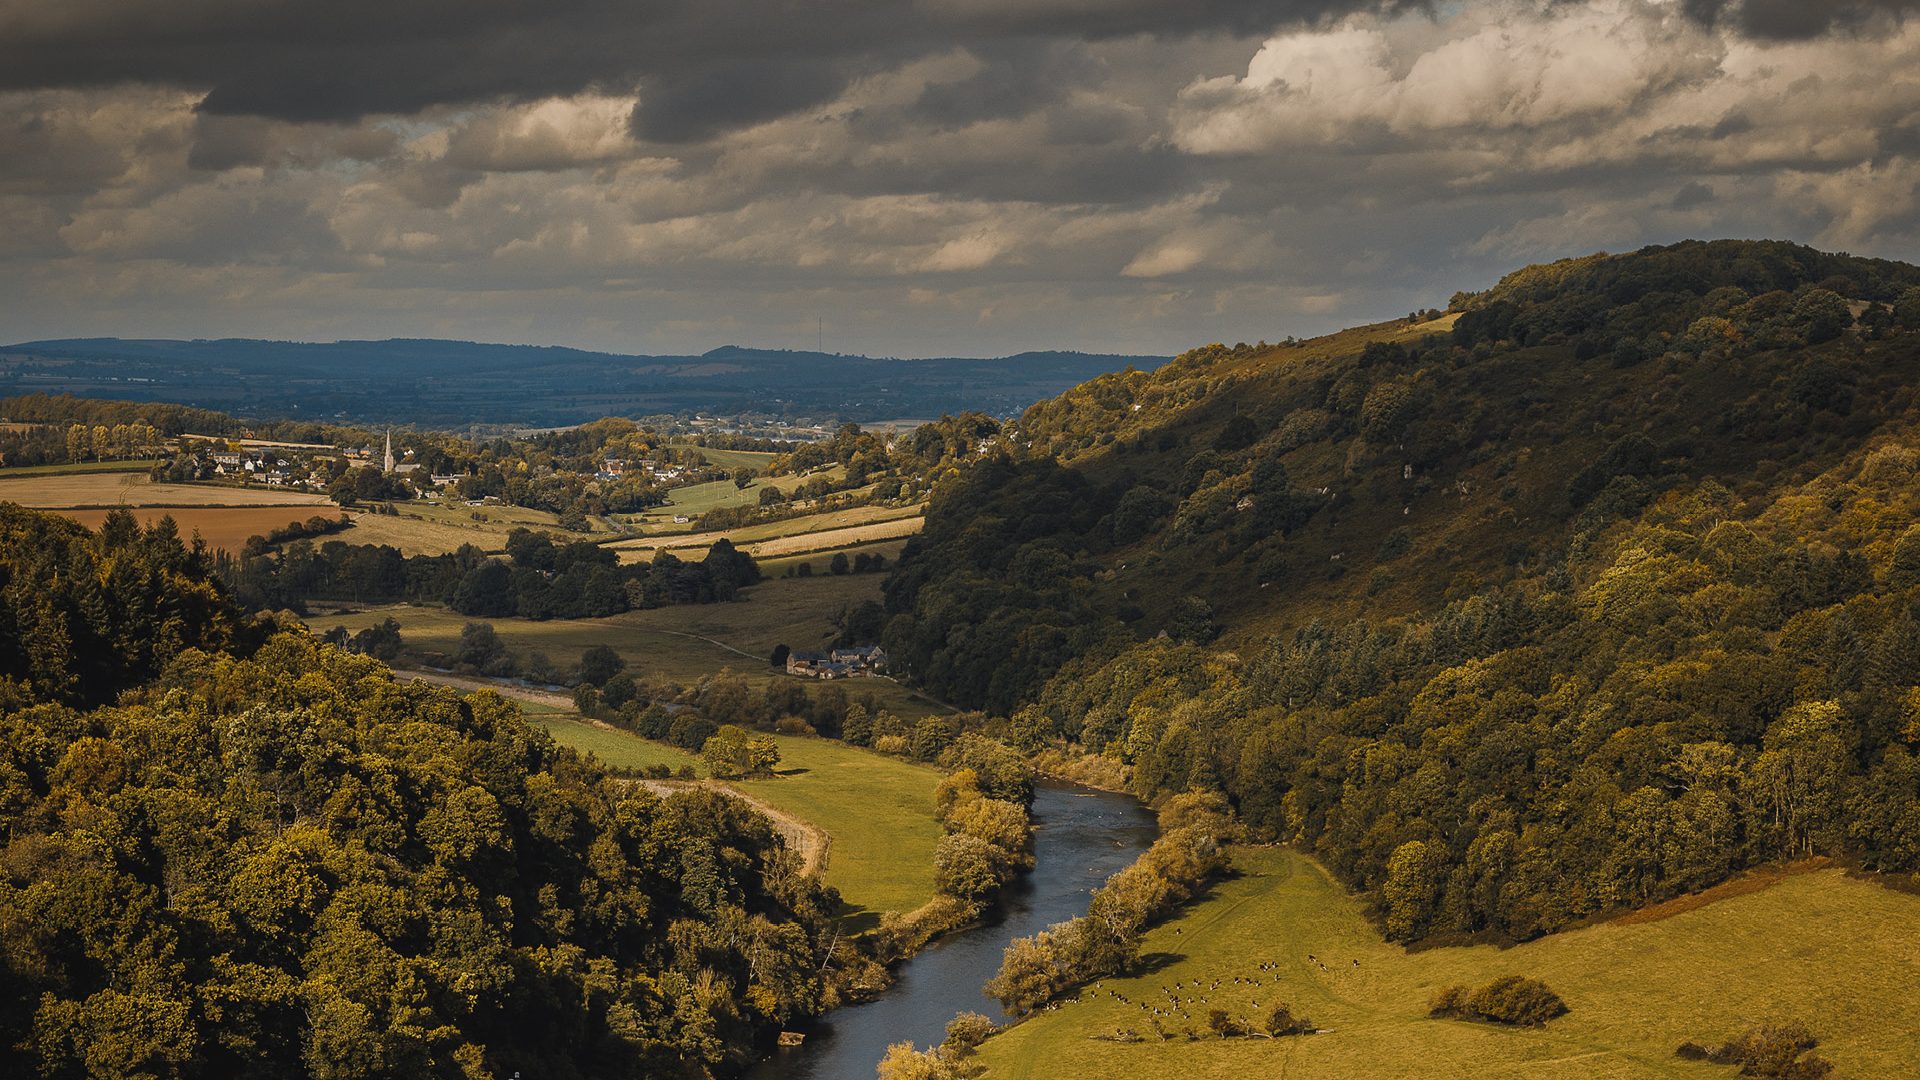 The River Wye and the village of Goodrich, as seen from Symonds Yat Rock, Gloucestershire and Herefordshire, England.